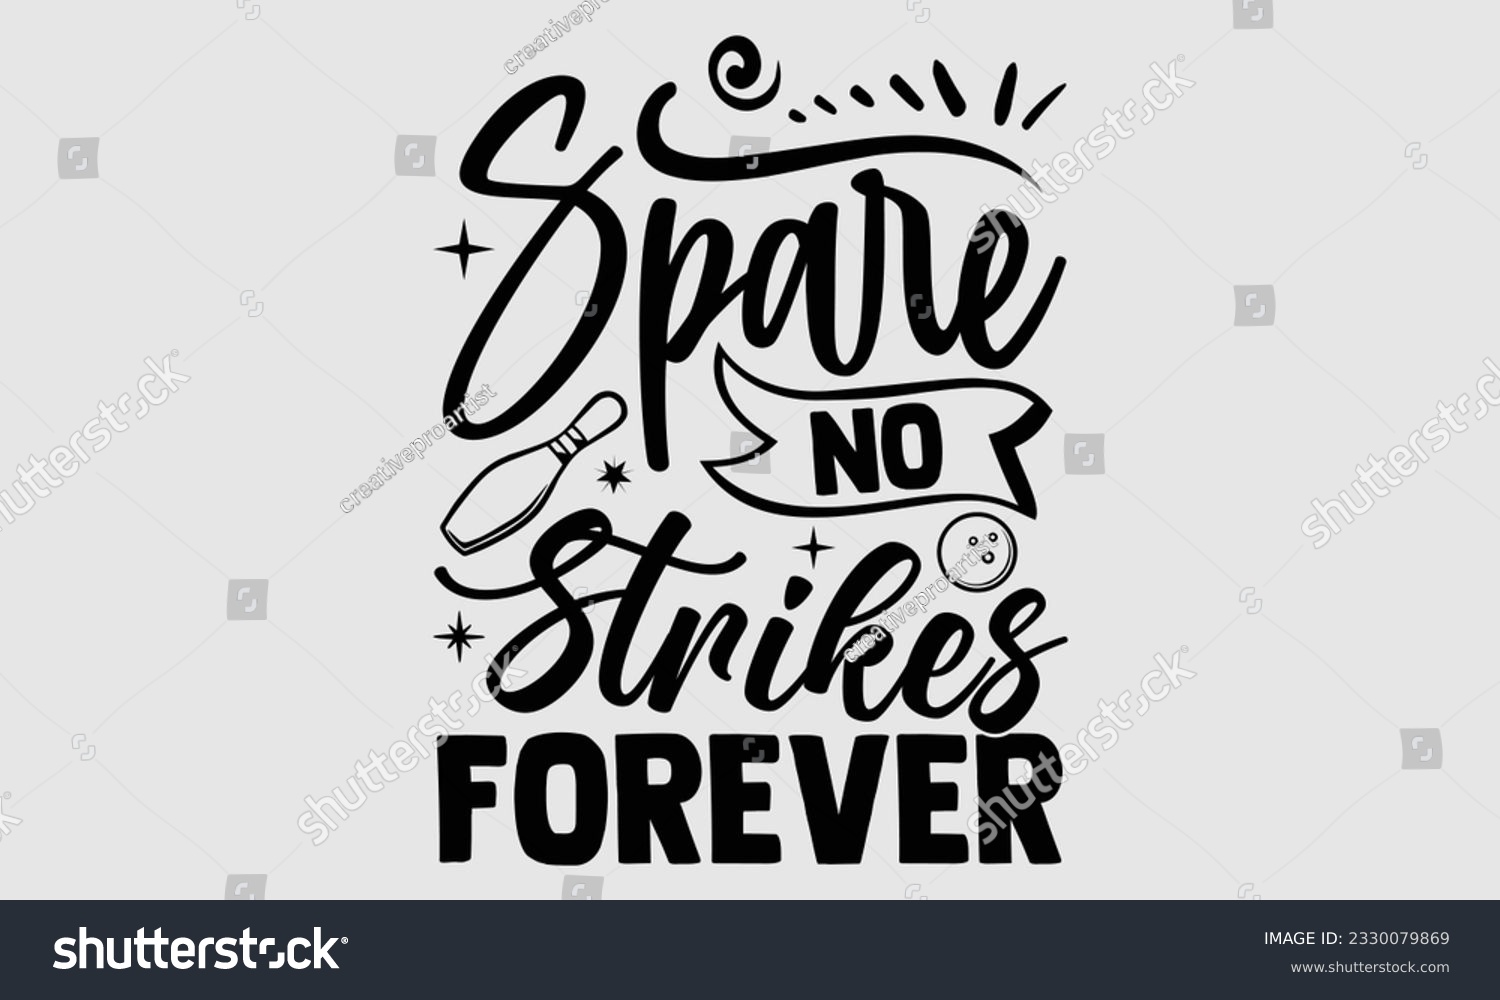 SVG of Spare No Strikes Forever- Bowling t-shirt design, Handmade calligraphy vector Illustration for prints on SVG and bags, posters, greeting card template EPS svg